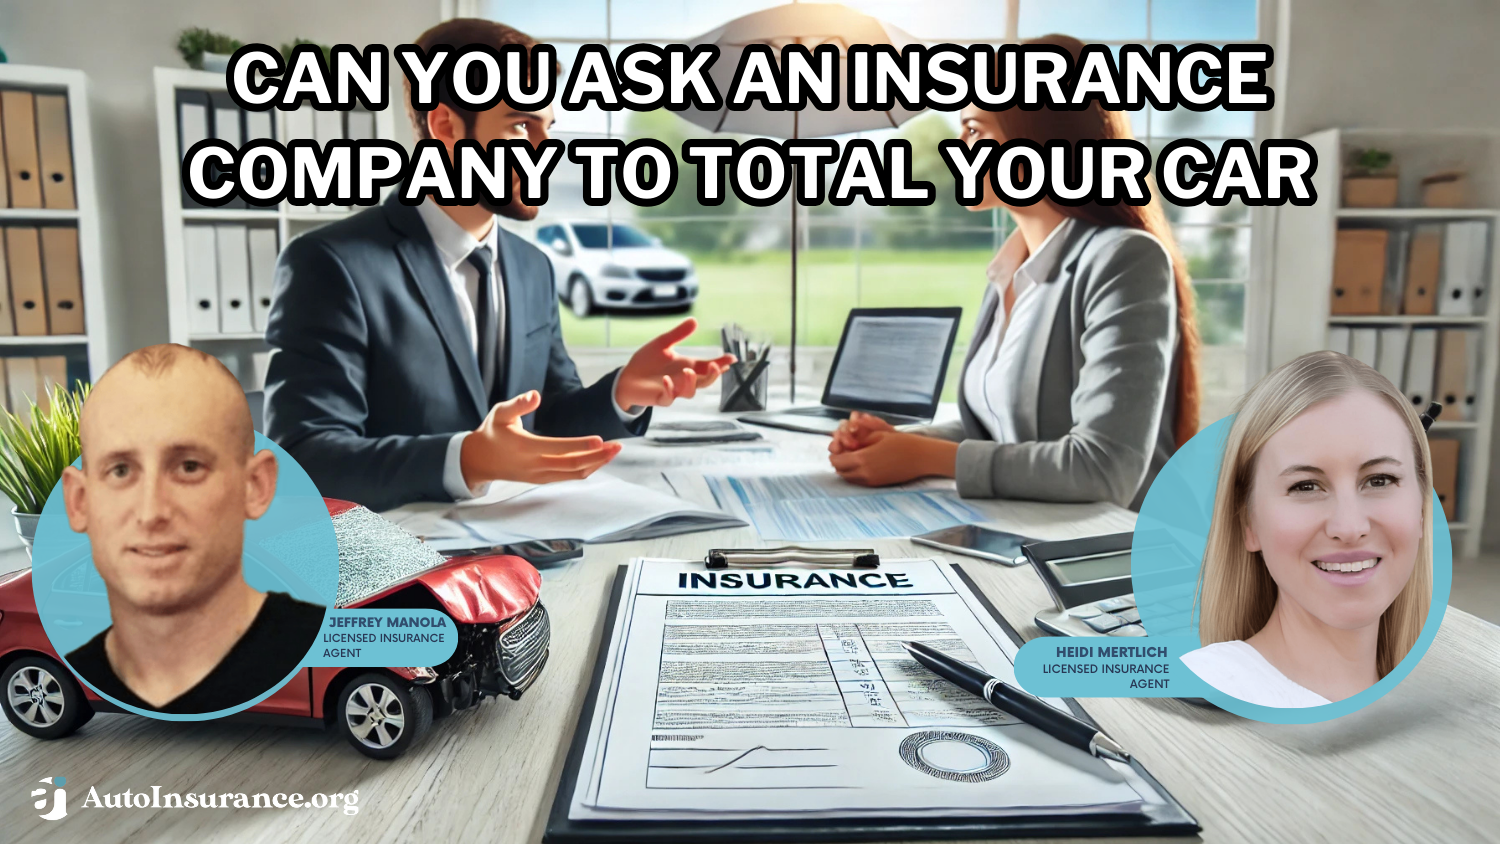 Can you ask an insurance company to total your car?